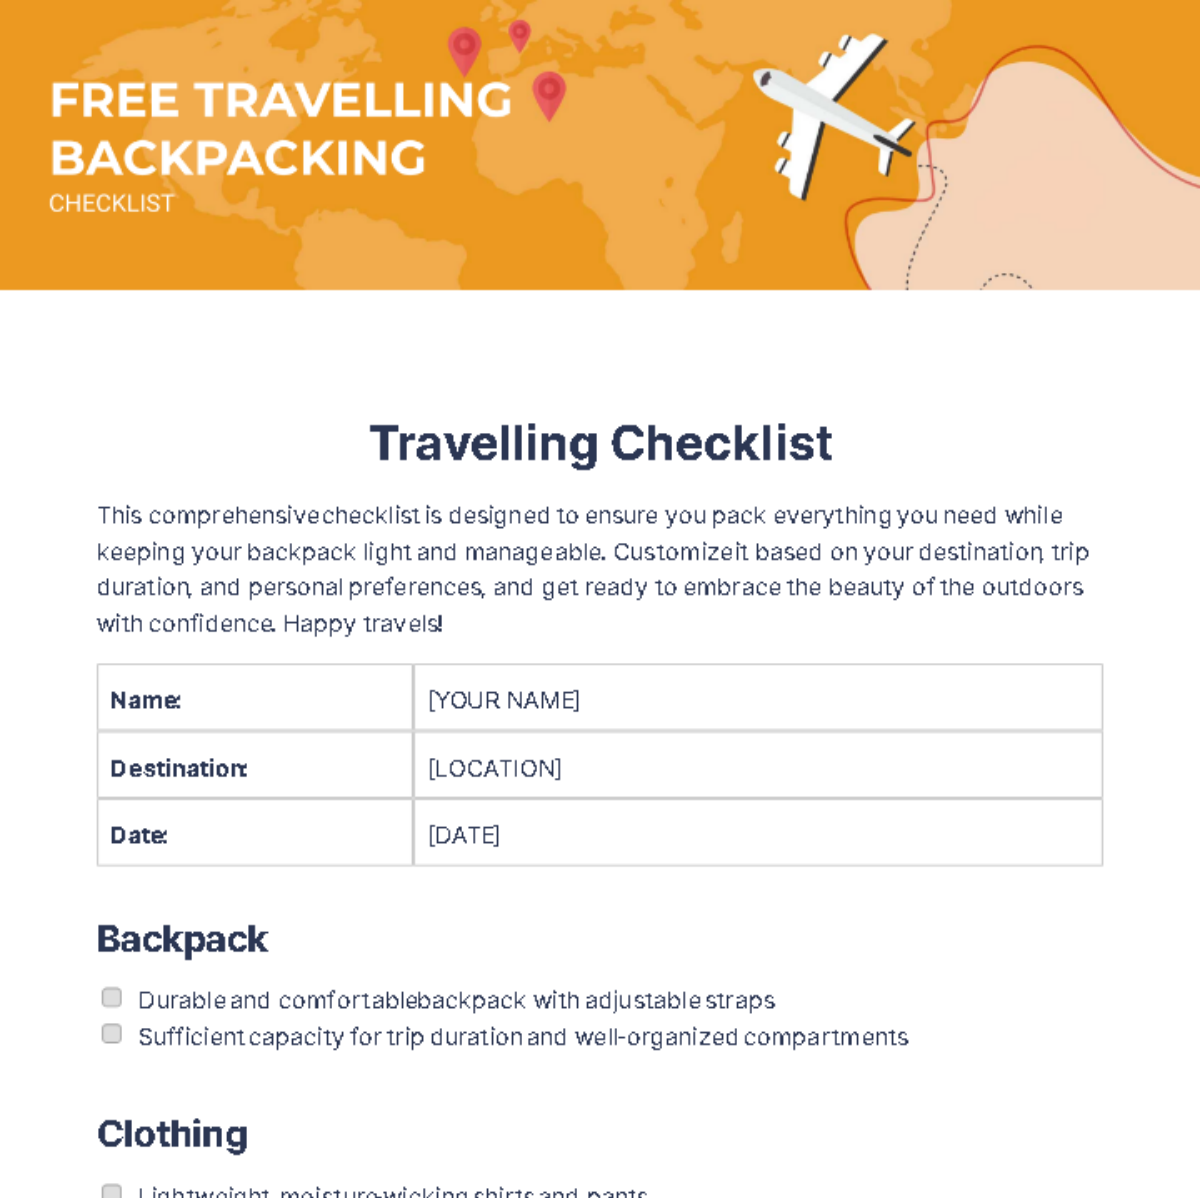 Free Travelling Backpacking Checklist Template